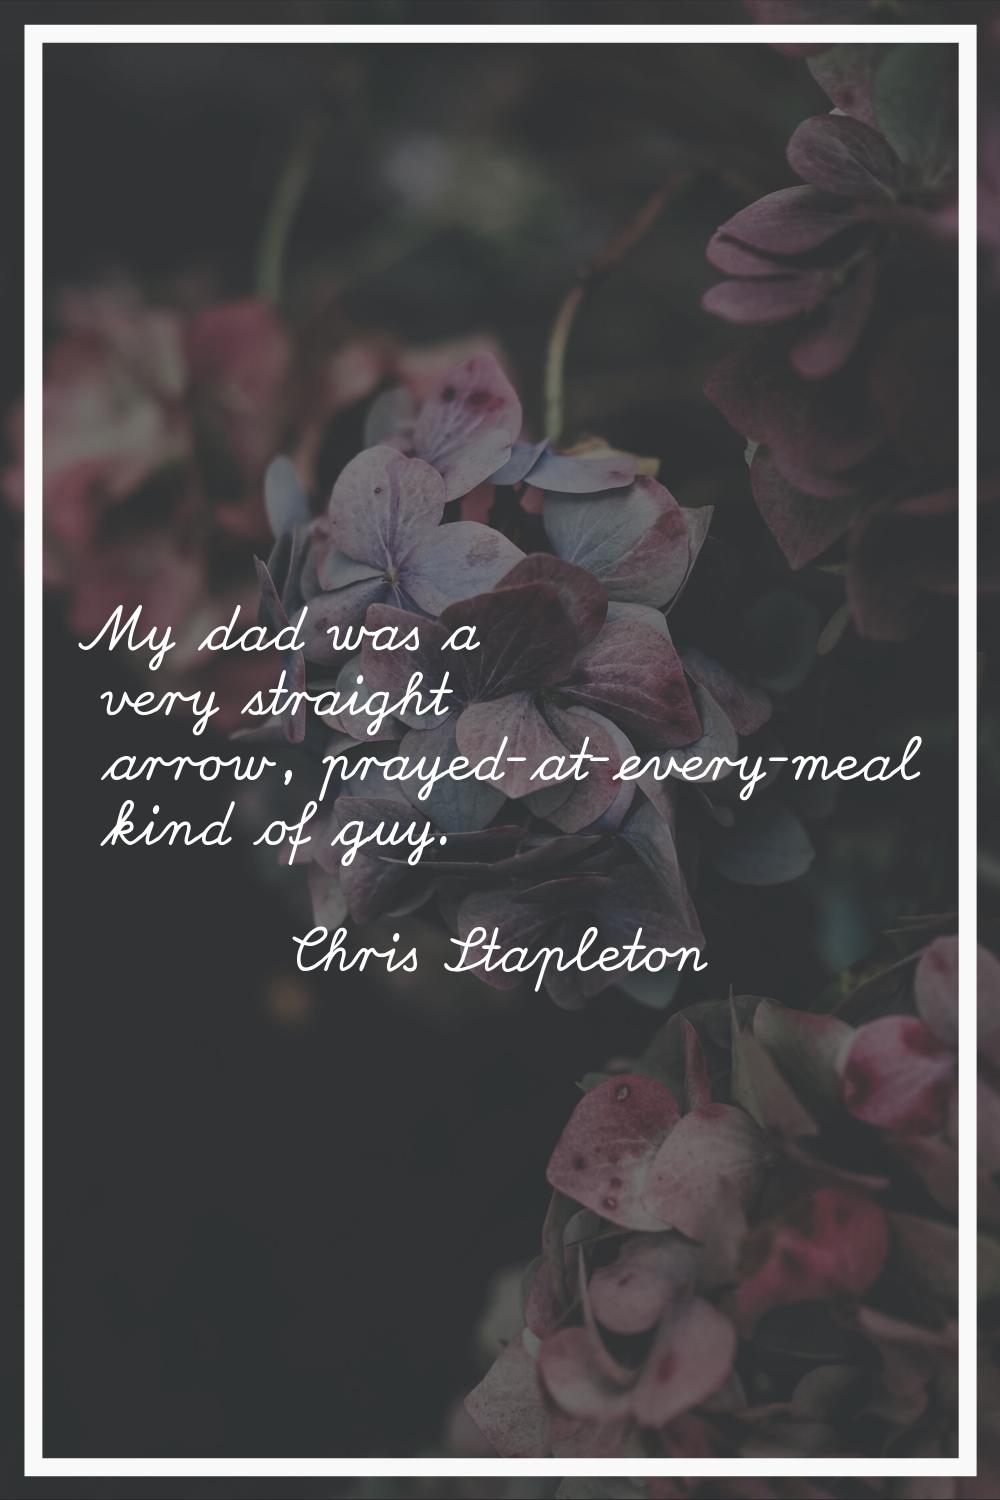 My dad was a very straight arrow, prayed-at-every-meal kind of guy.